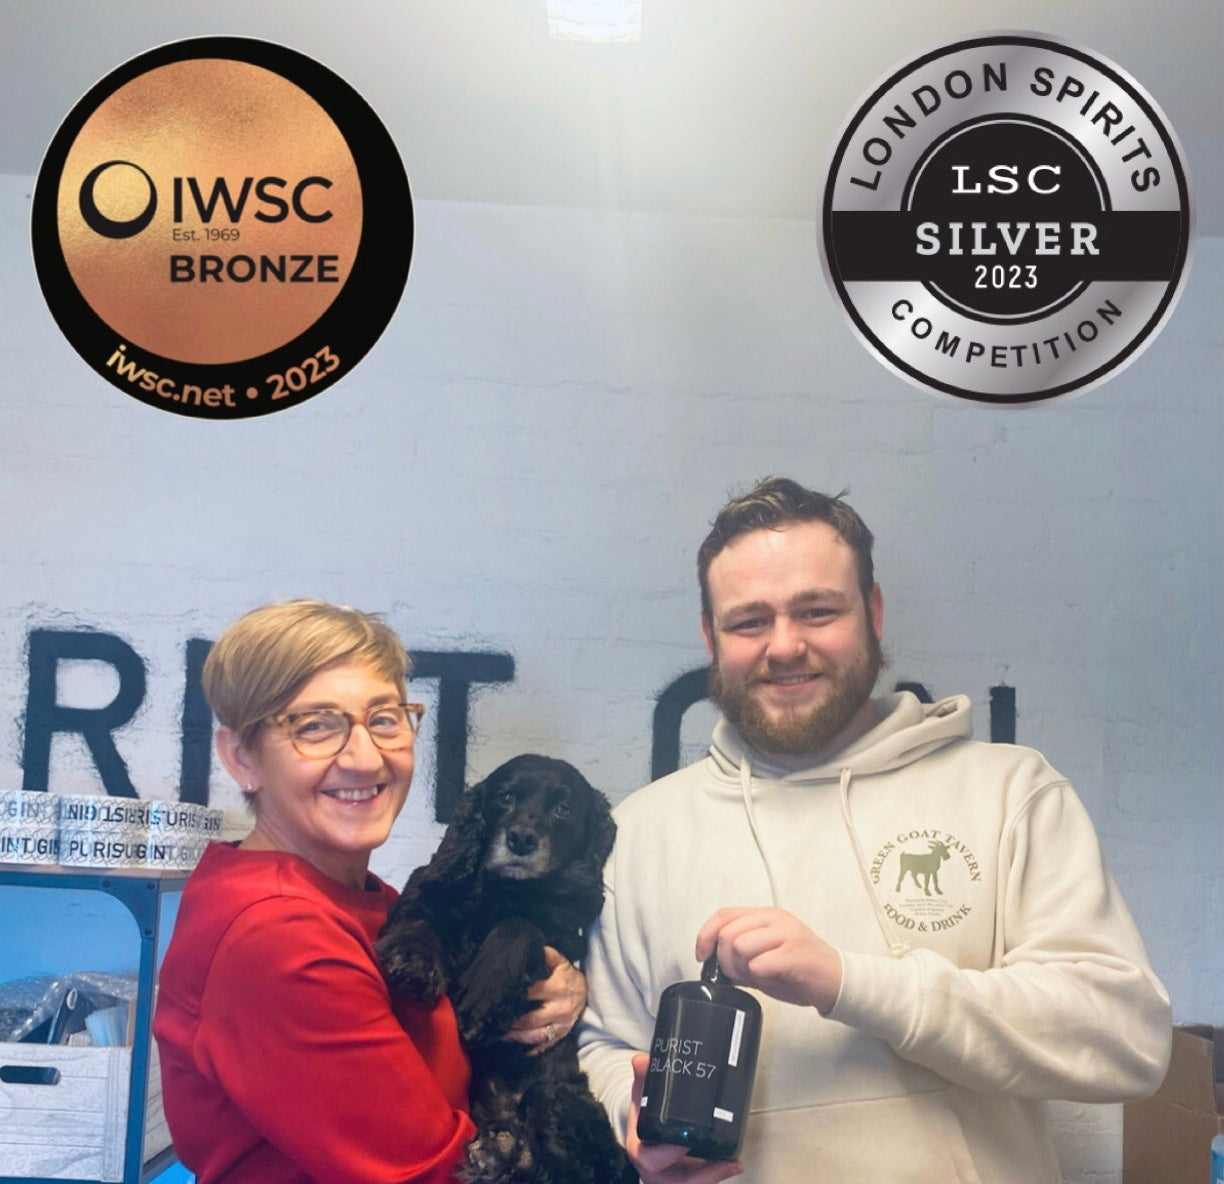 Colette, Charlie the Dog, and Bruce holding a bottle of Purist Black 57 gin with two medals at the top of the image. One is the bronze medal with IWSC and the other is a silver medal with the London Spirit Competition. 